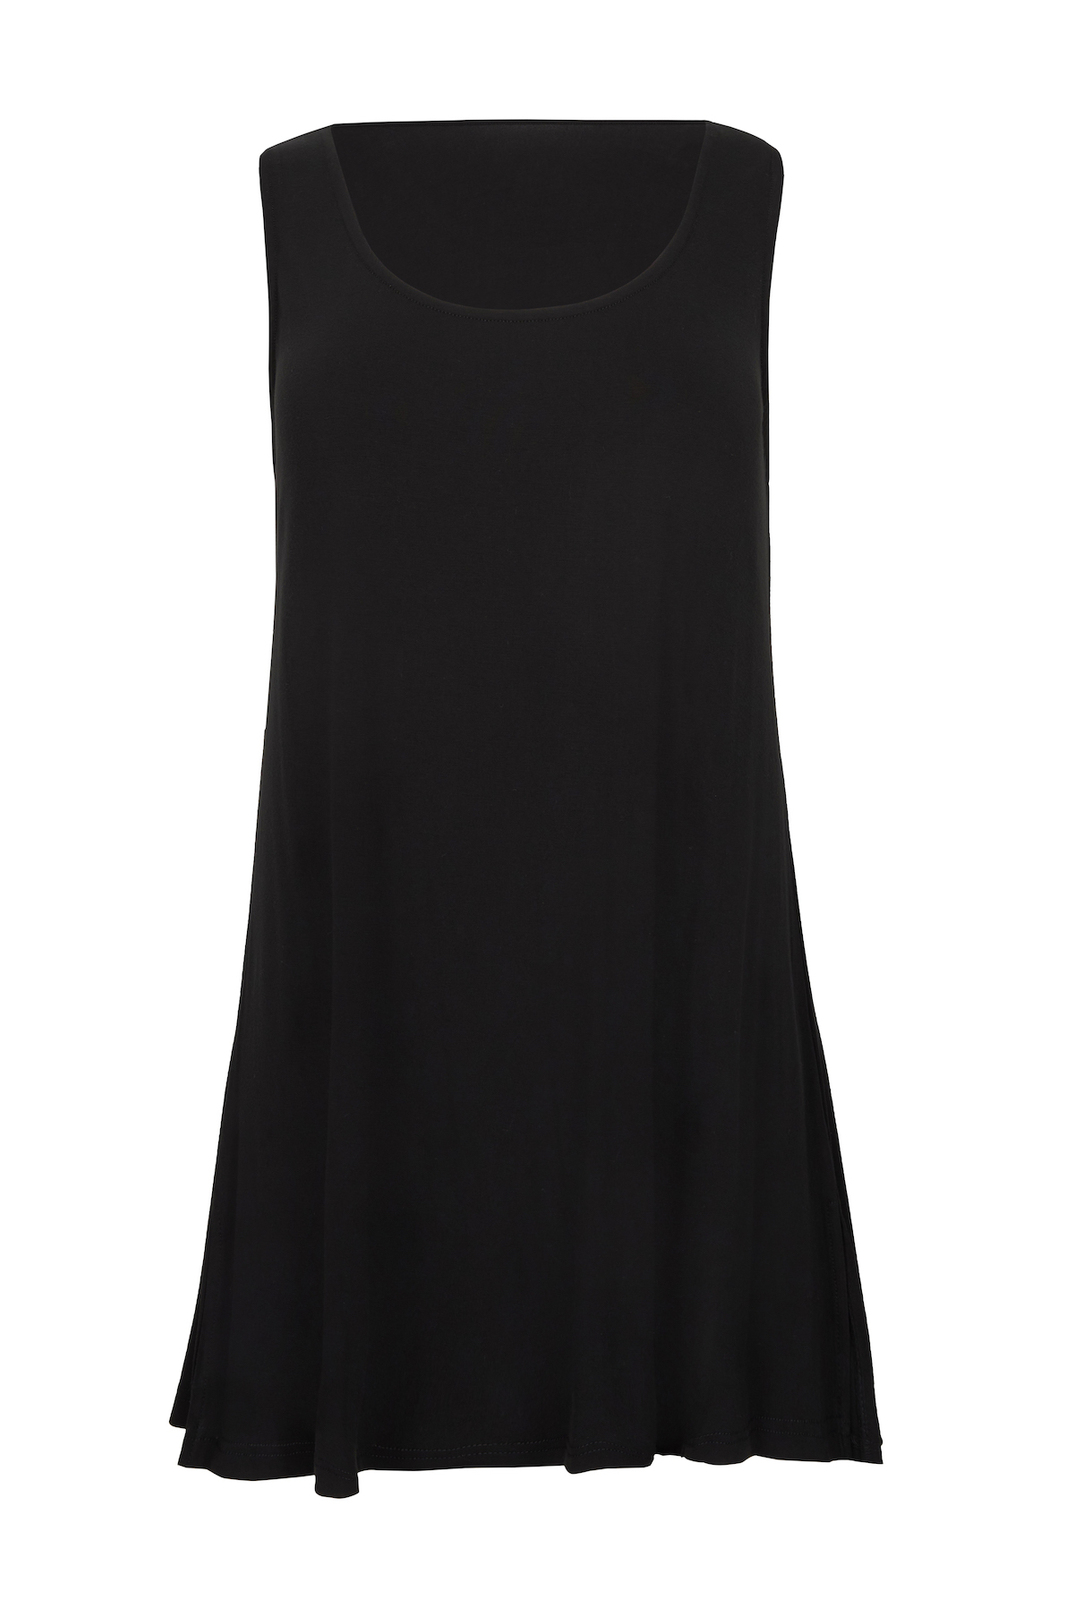 Bamboo Singlet A-line | Bodypeace Bamboo Clothing